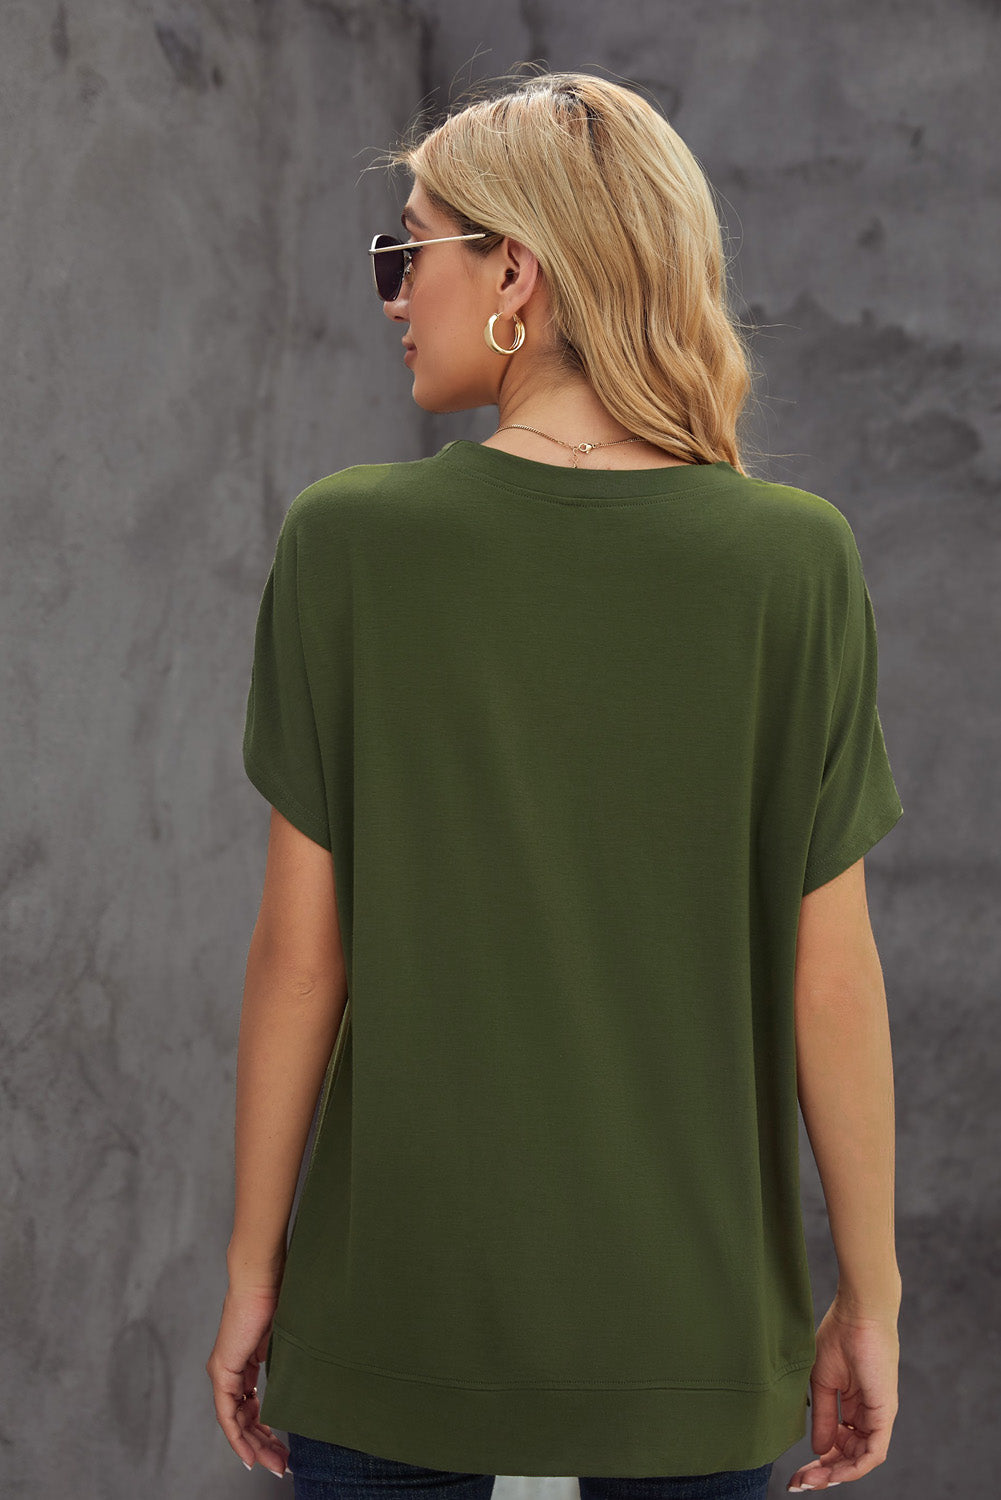 Green Round Neck Short Sleeve Solid Color Tee